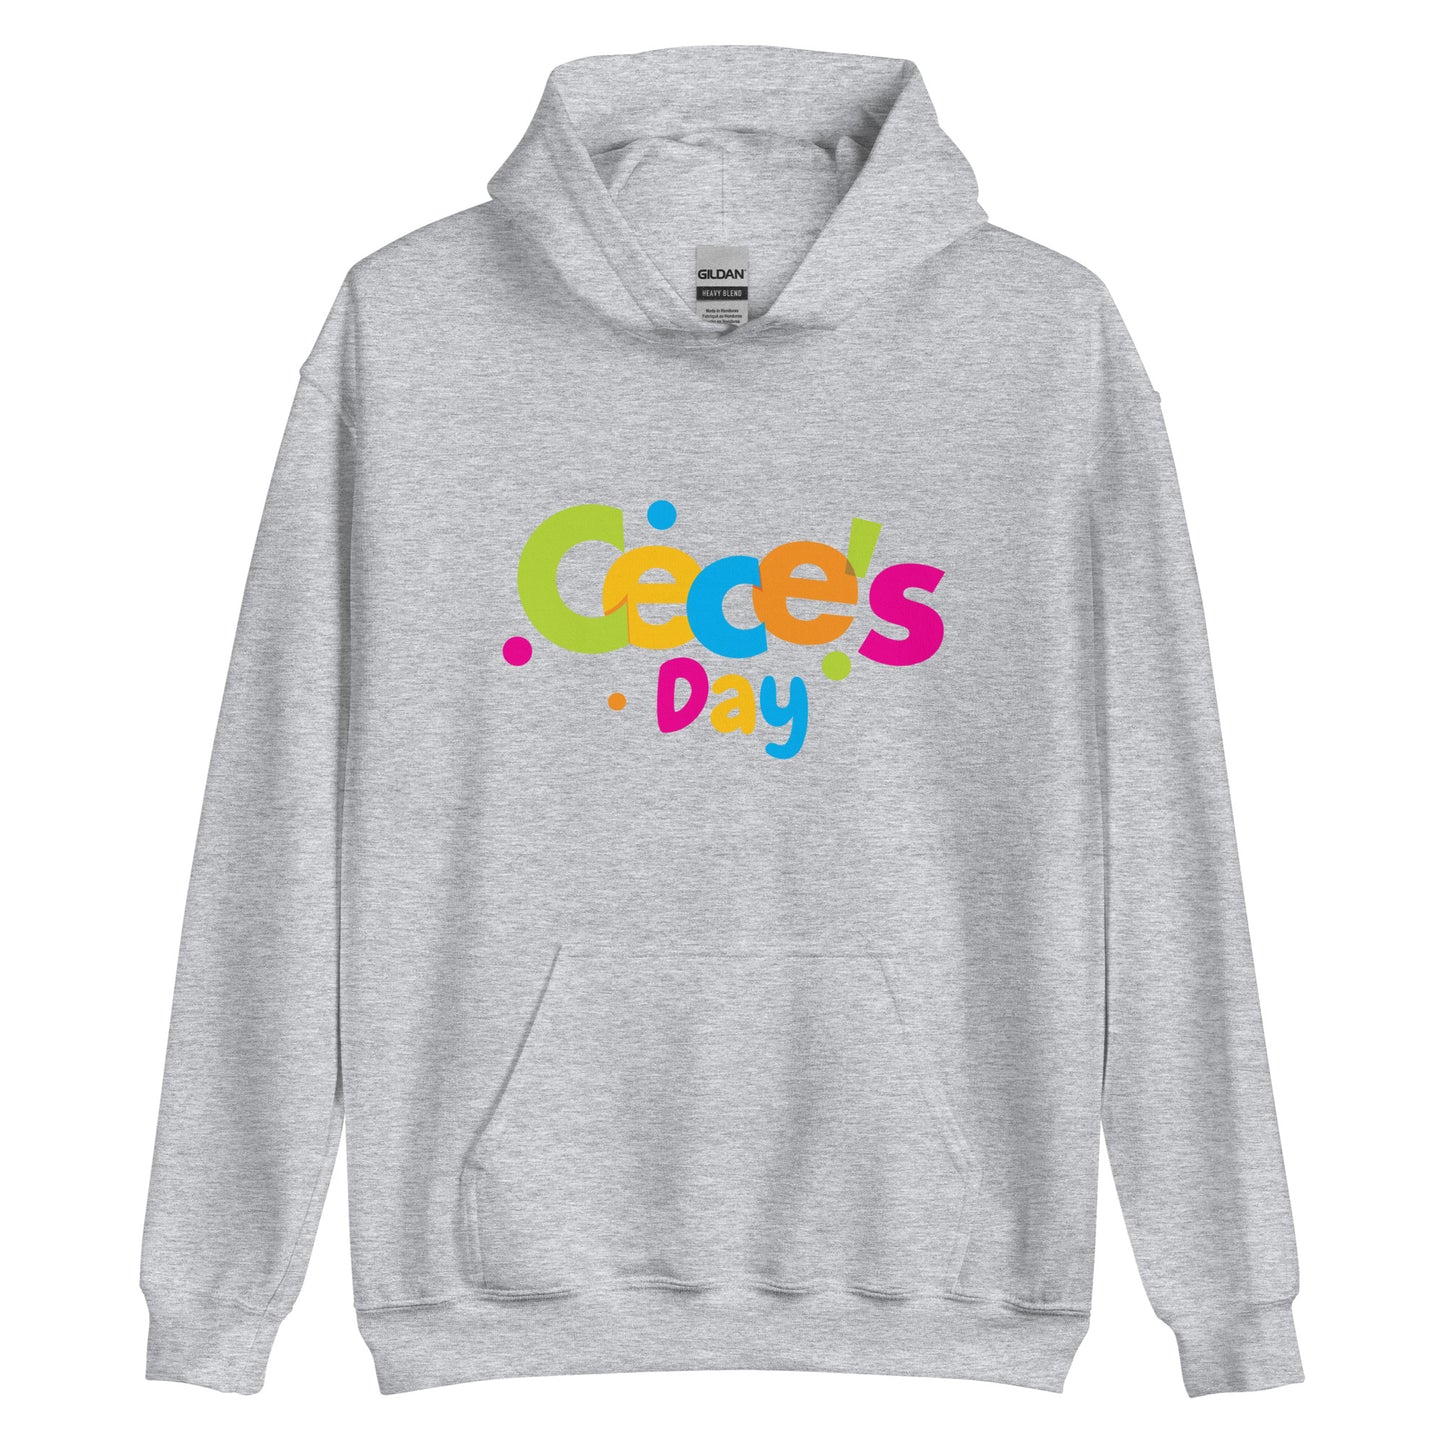 Cece's Day Adult Unisex Hoodie